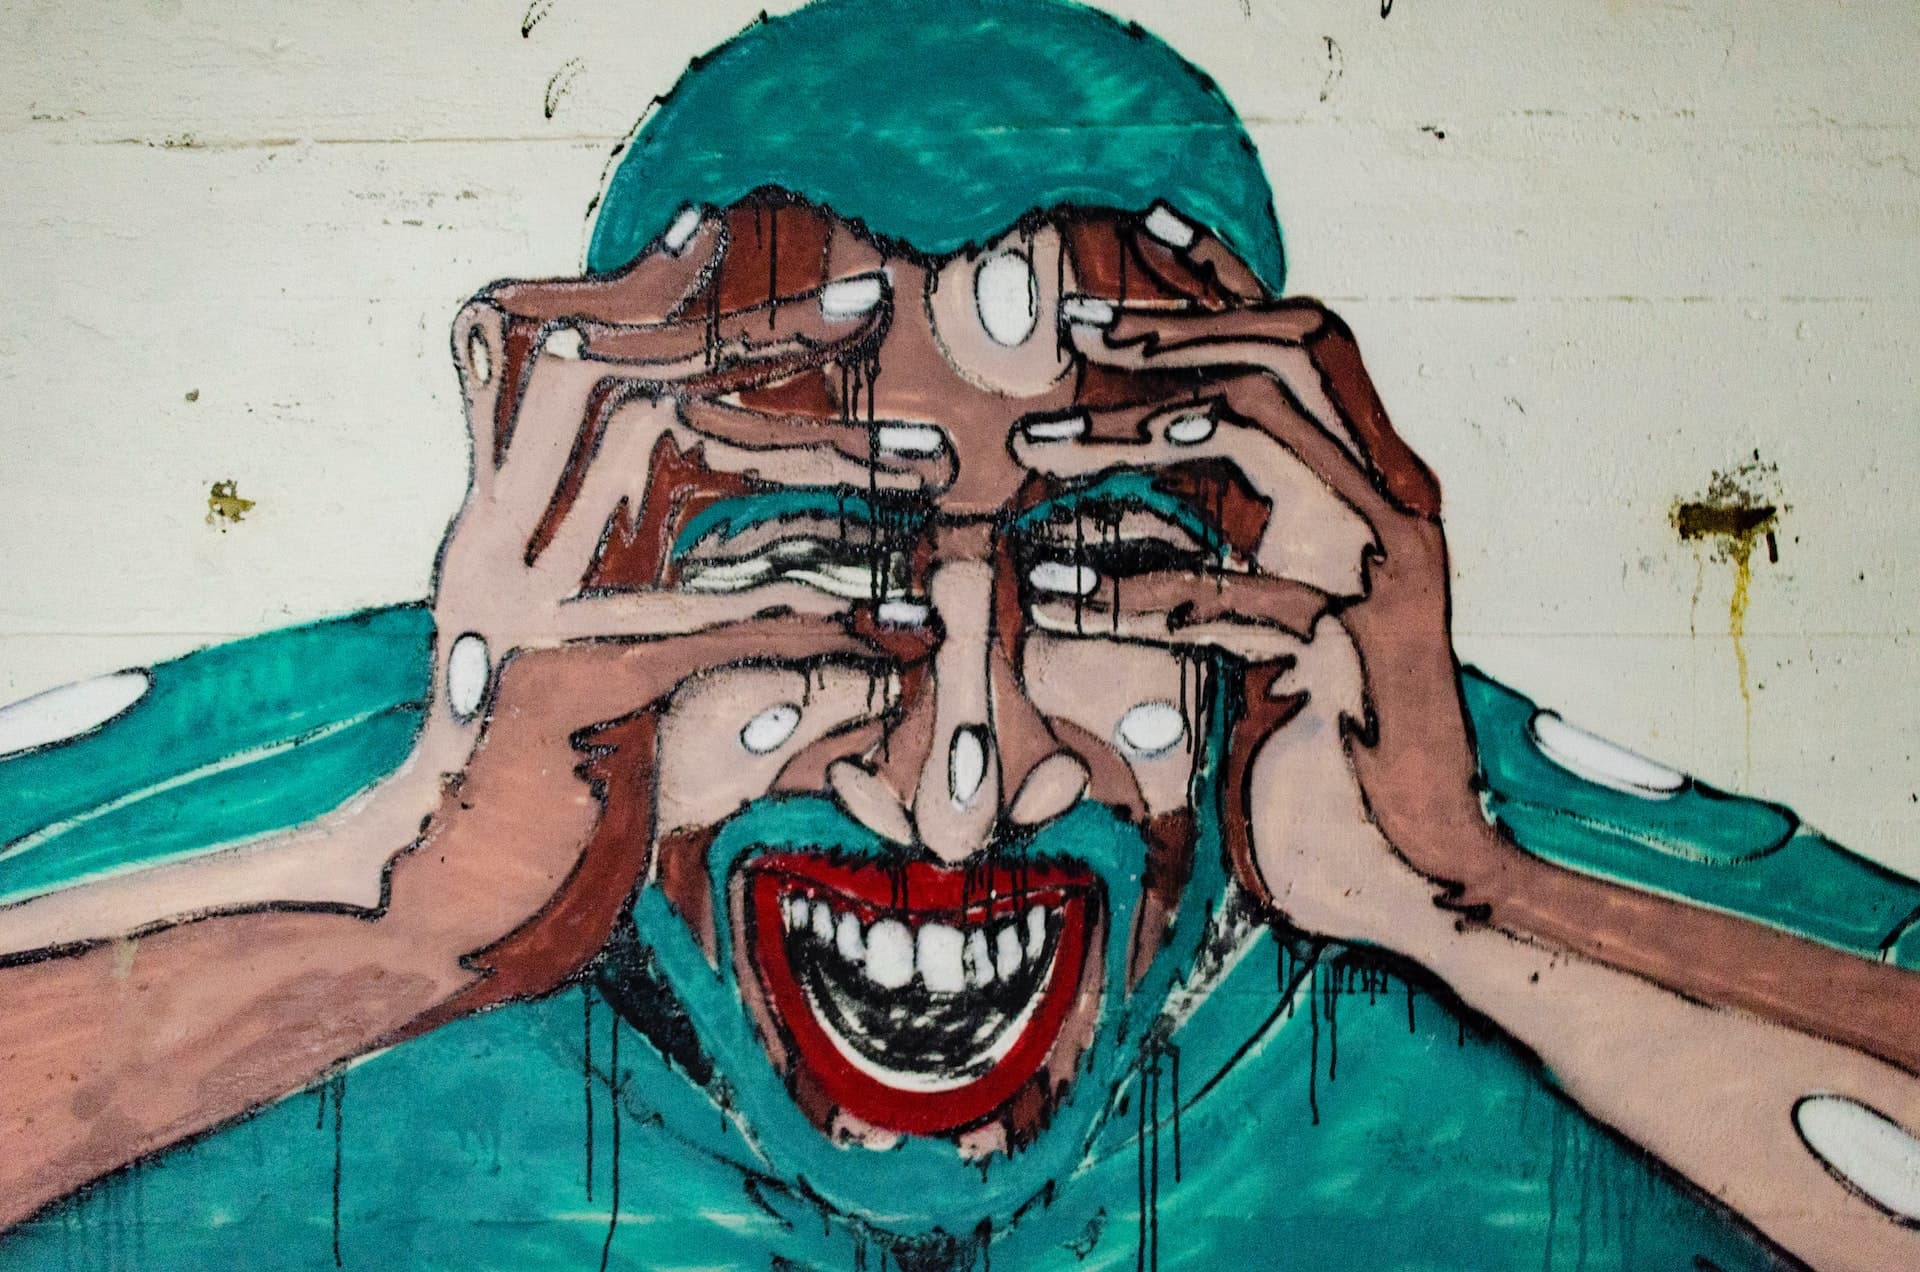 Painting of a man in pain, screaming, his hands on his face.